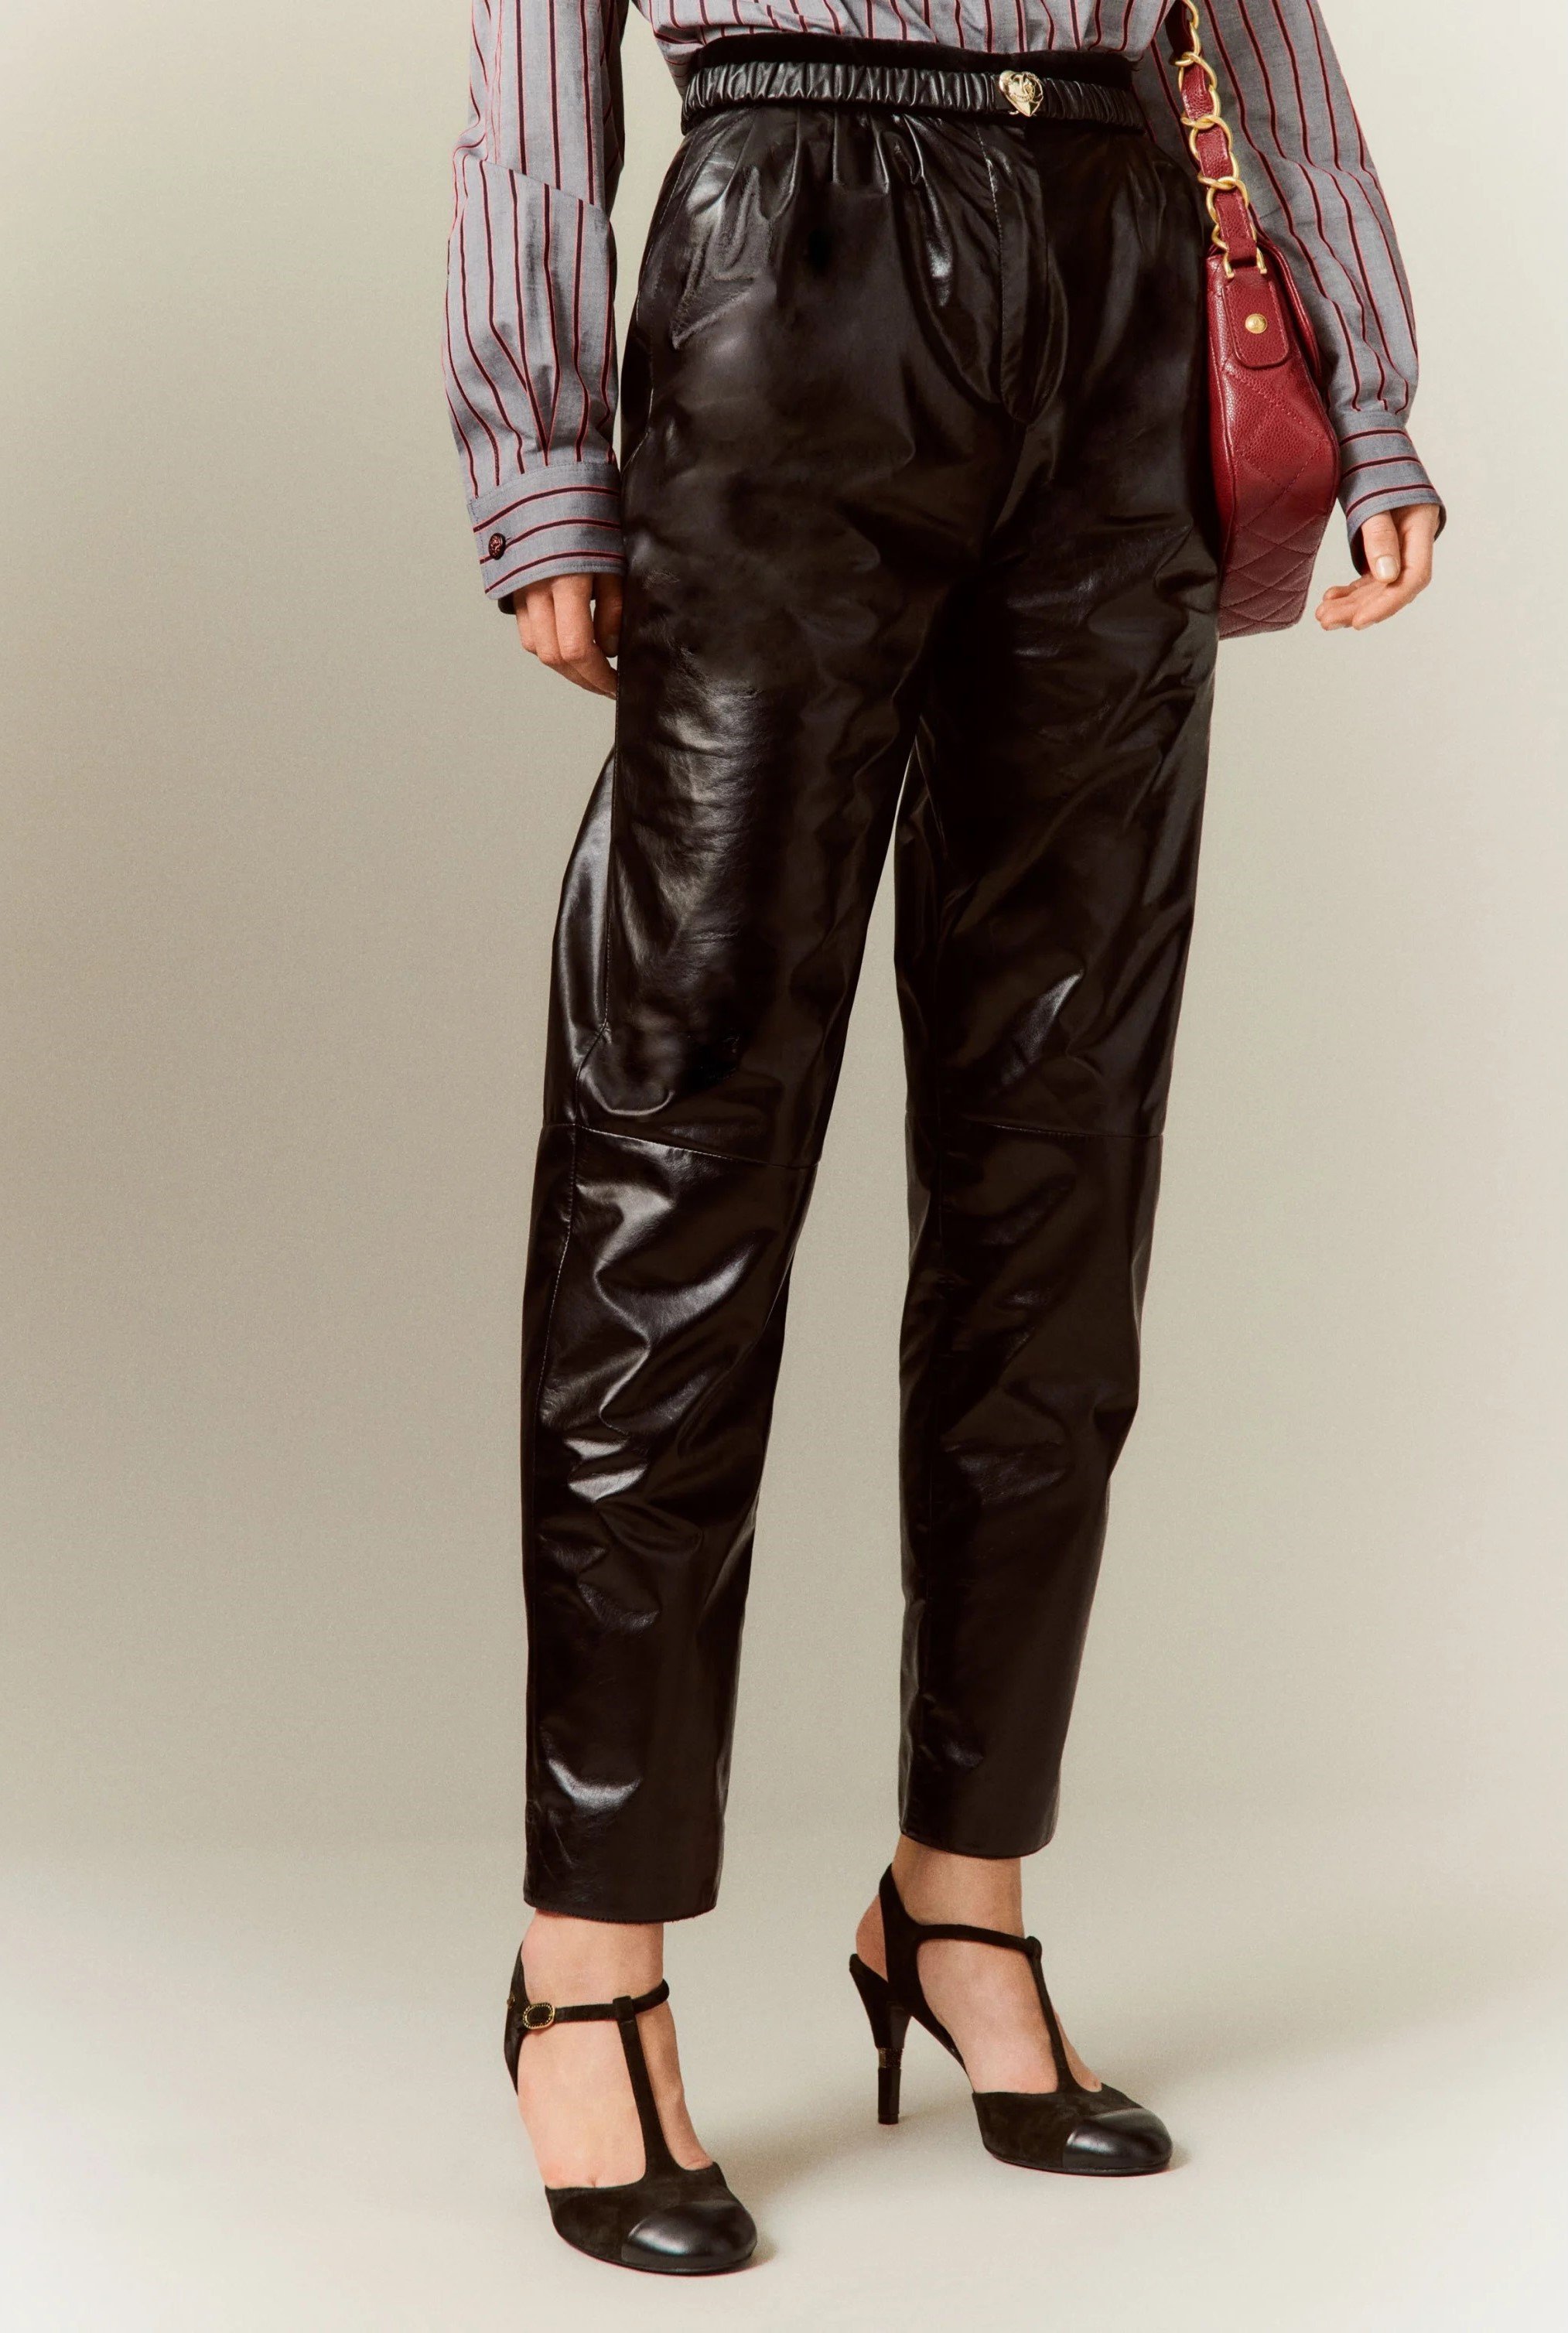 Chanel Tailored Leather Trousers.jpg